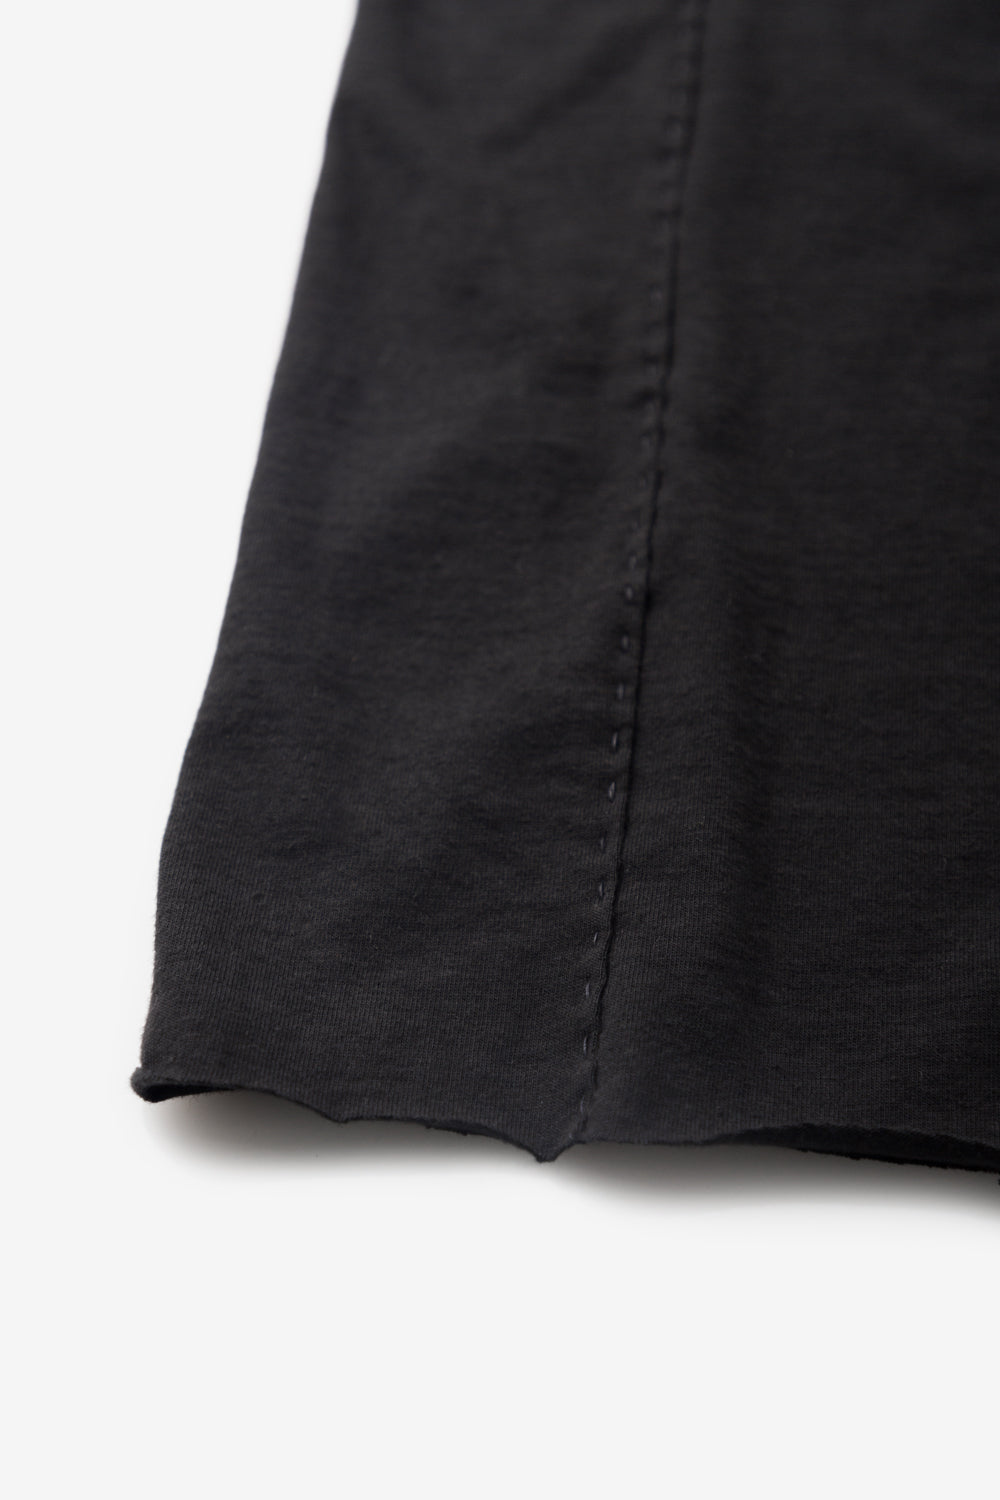 The School of Making The Crop Pant kit with Elastic Waistband in Black